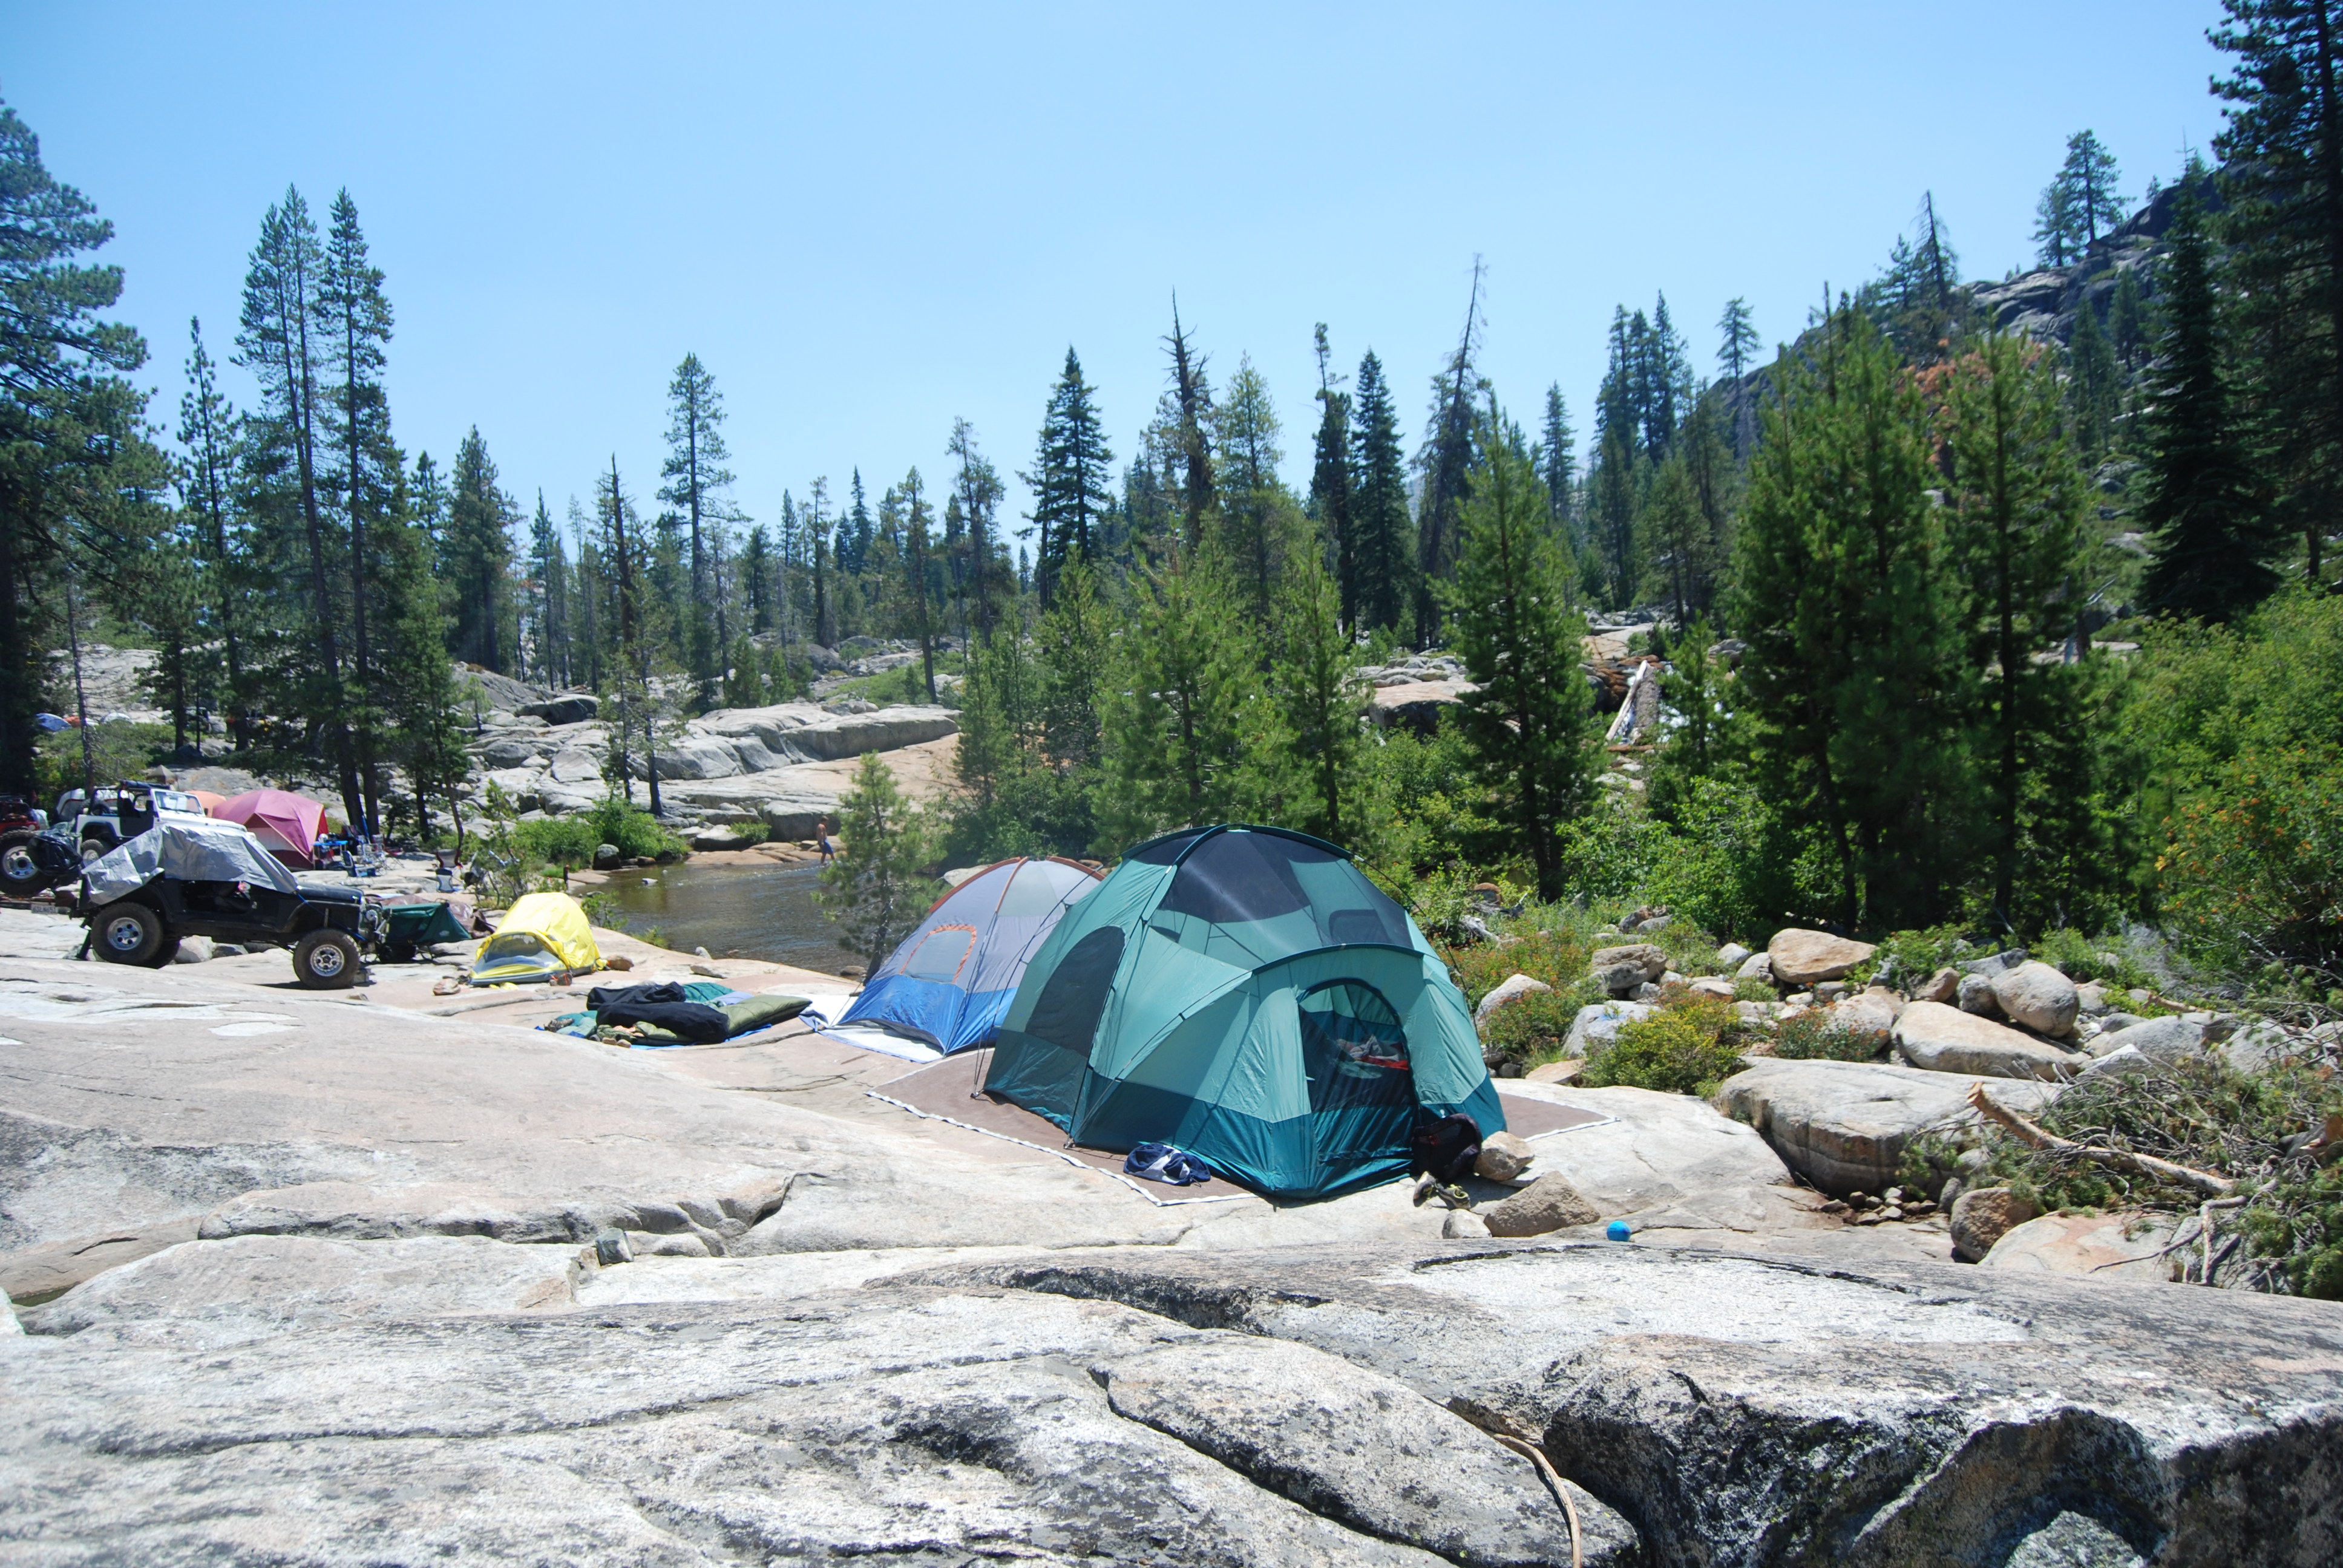 Tents on rock outcropping